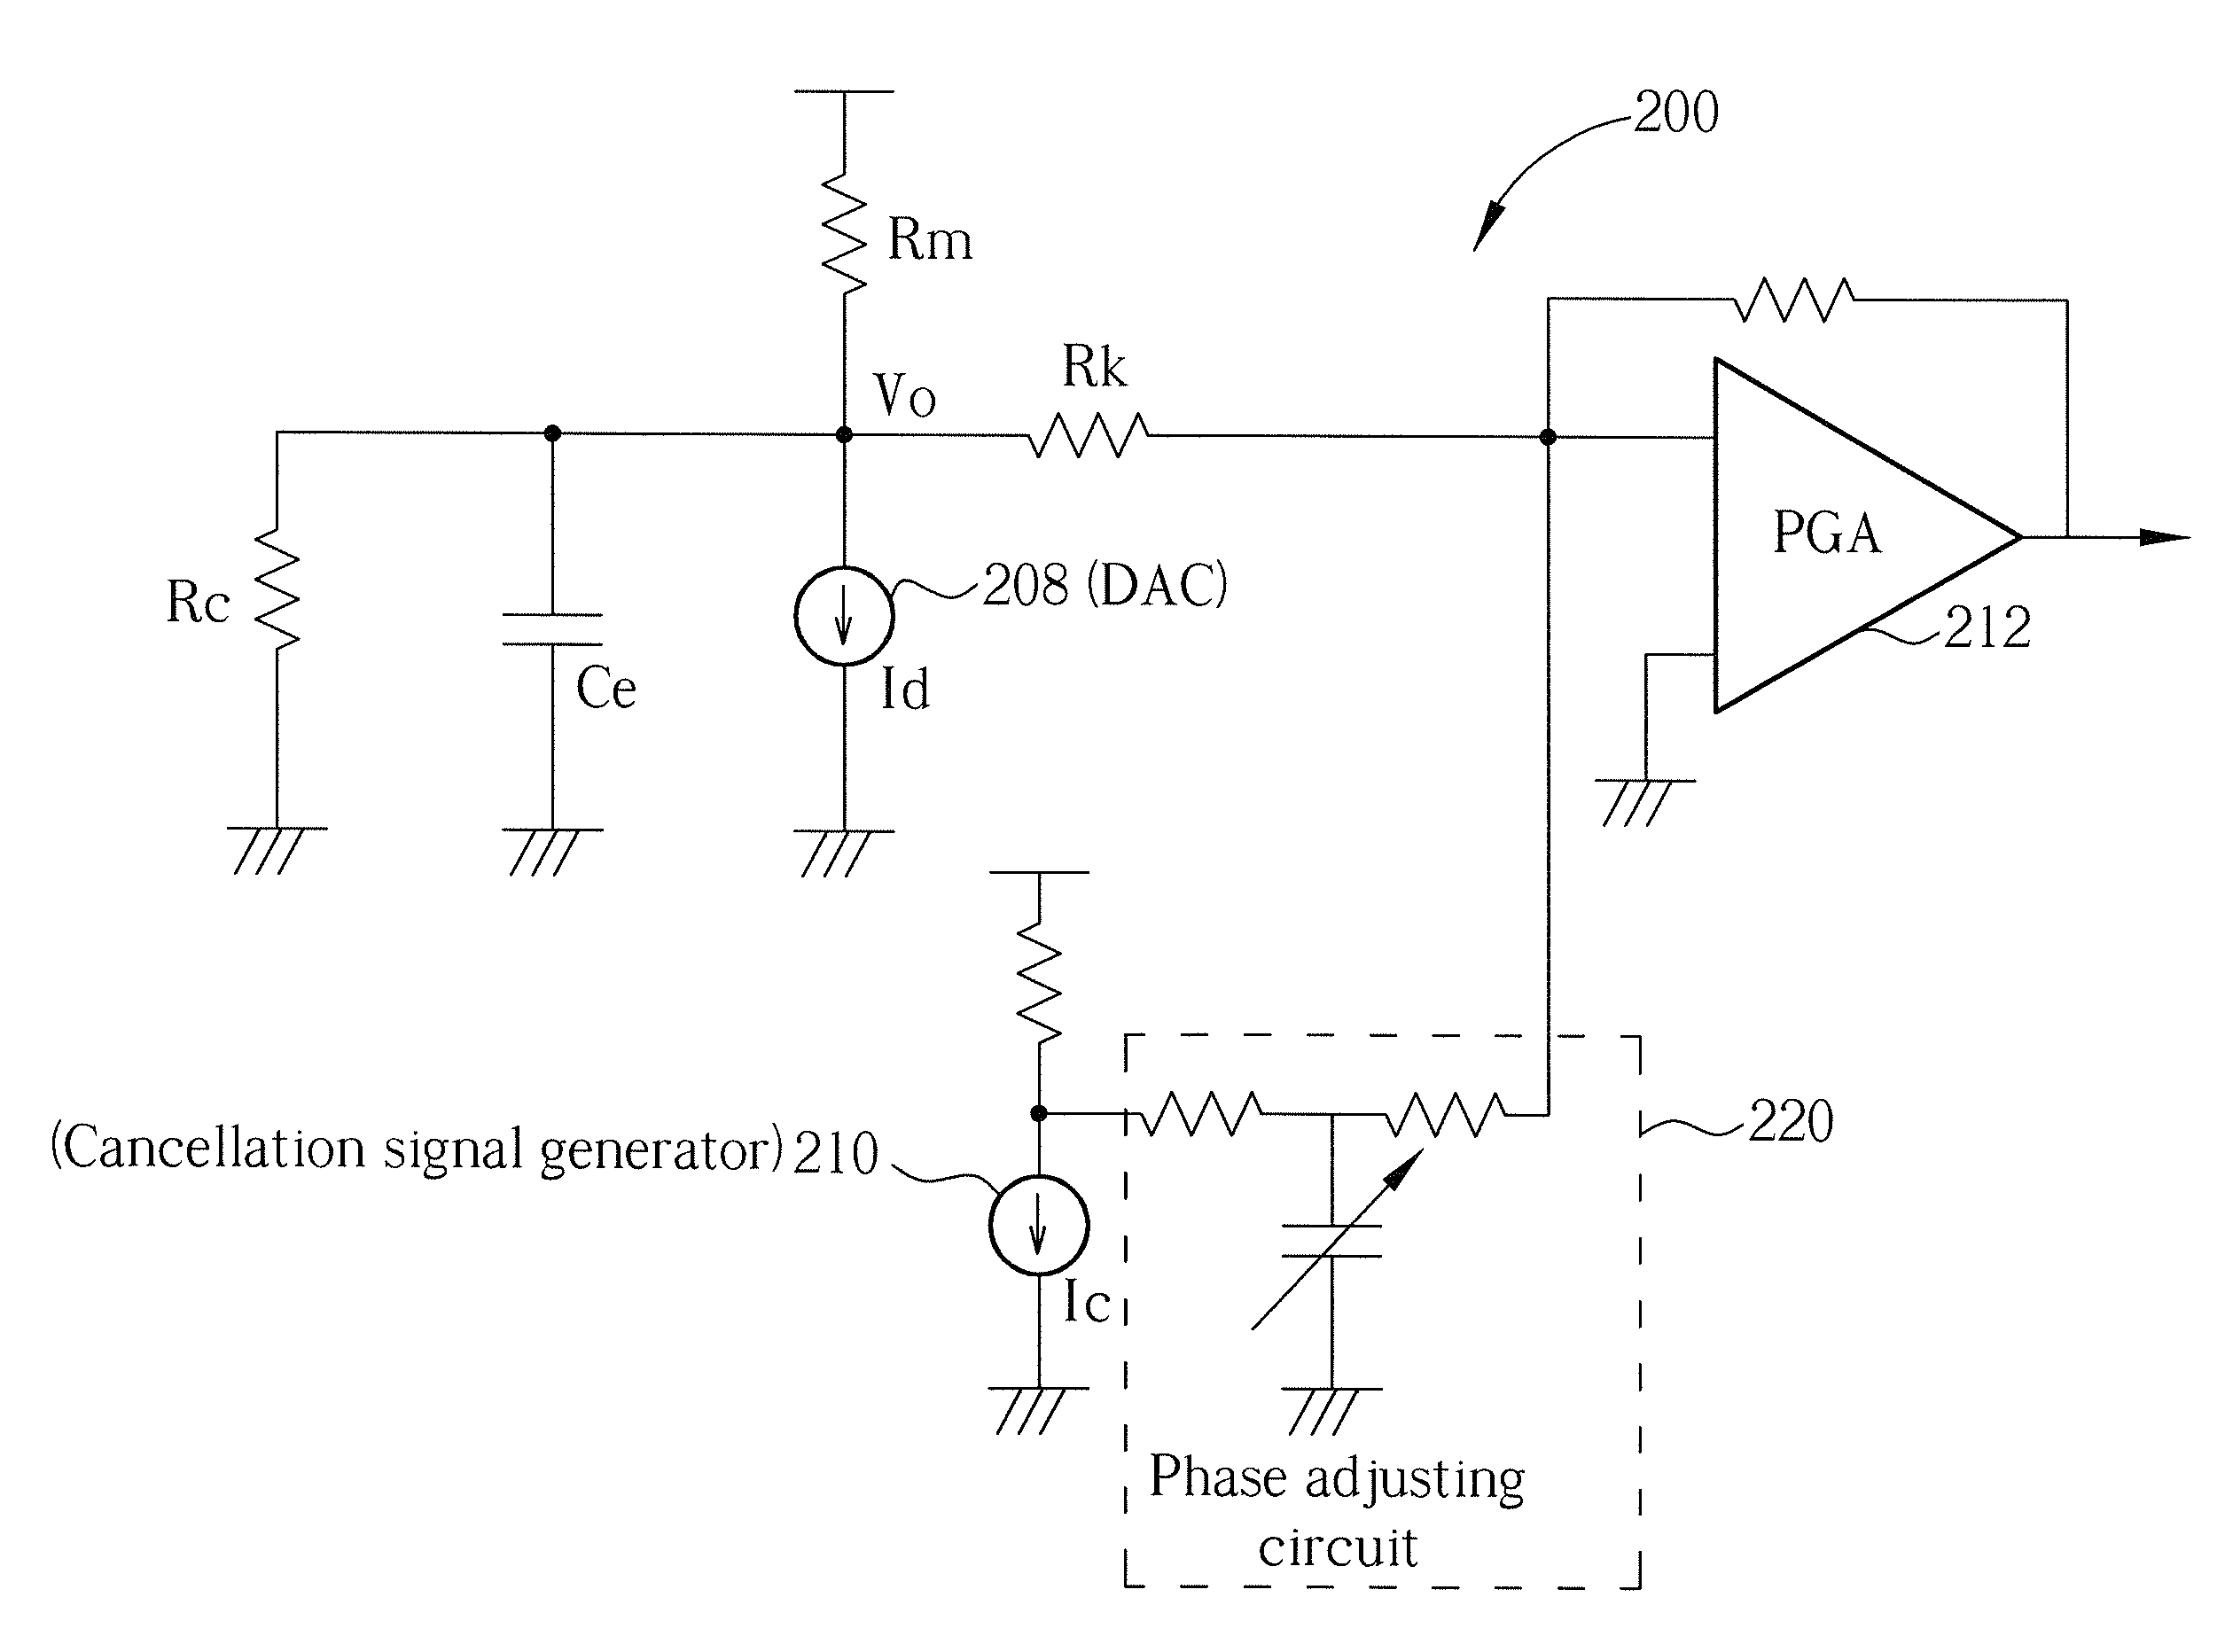 Transceiver for full duplex communication systems